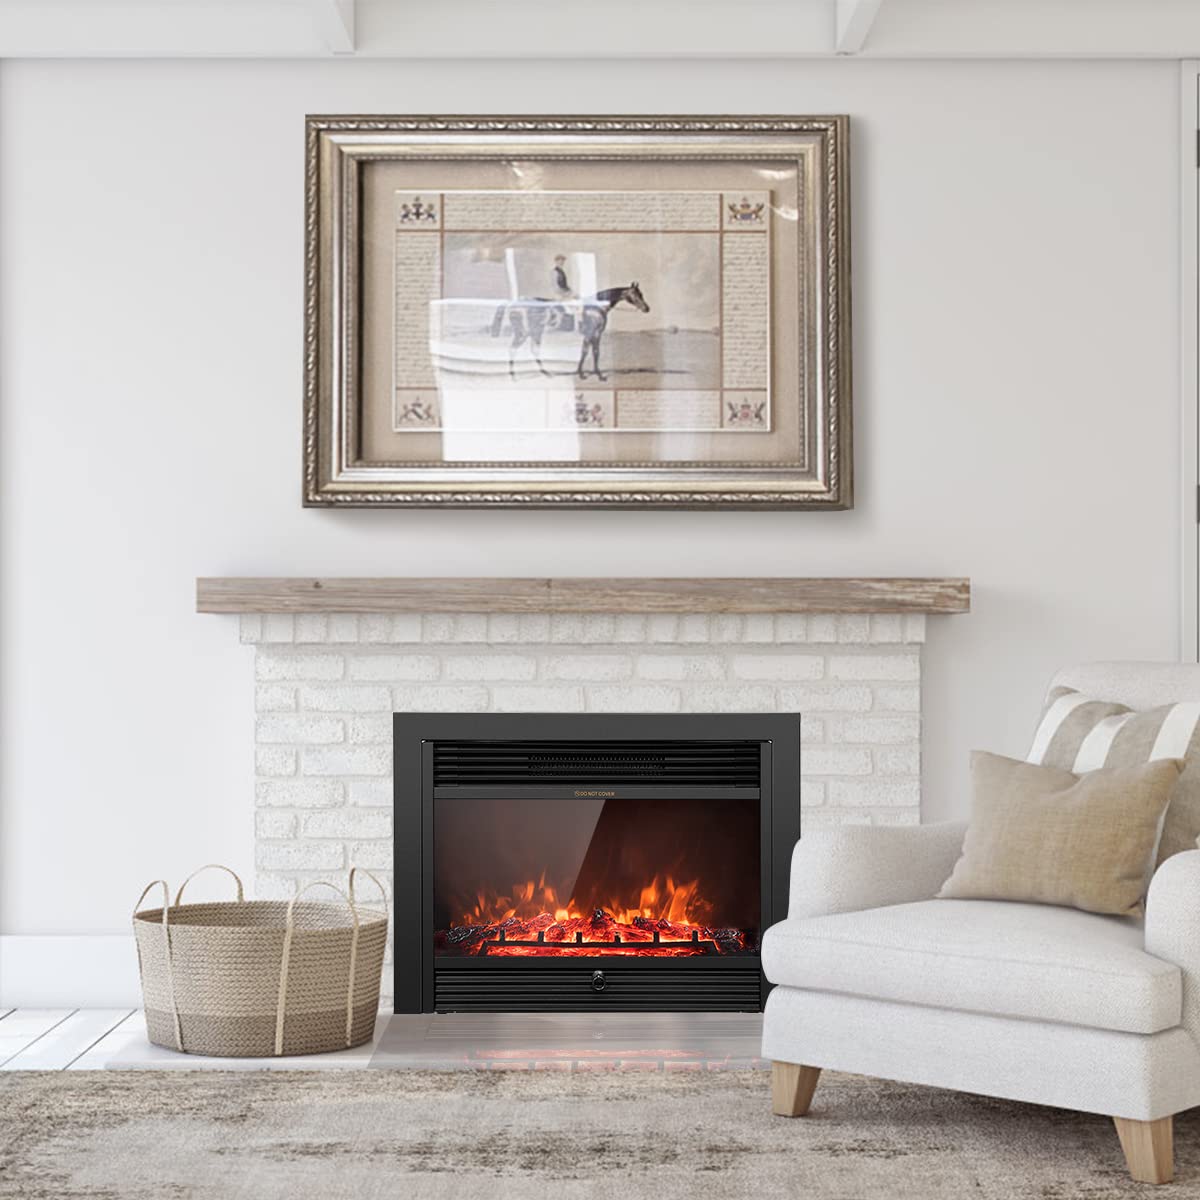 Giantex 28.5" Electric Fireplace Insert Recessed Mounted with 3 Color Adjustable Flames